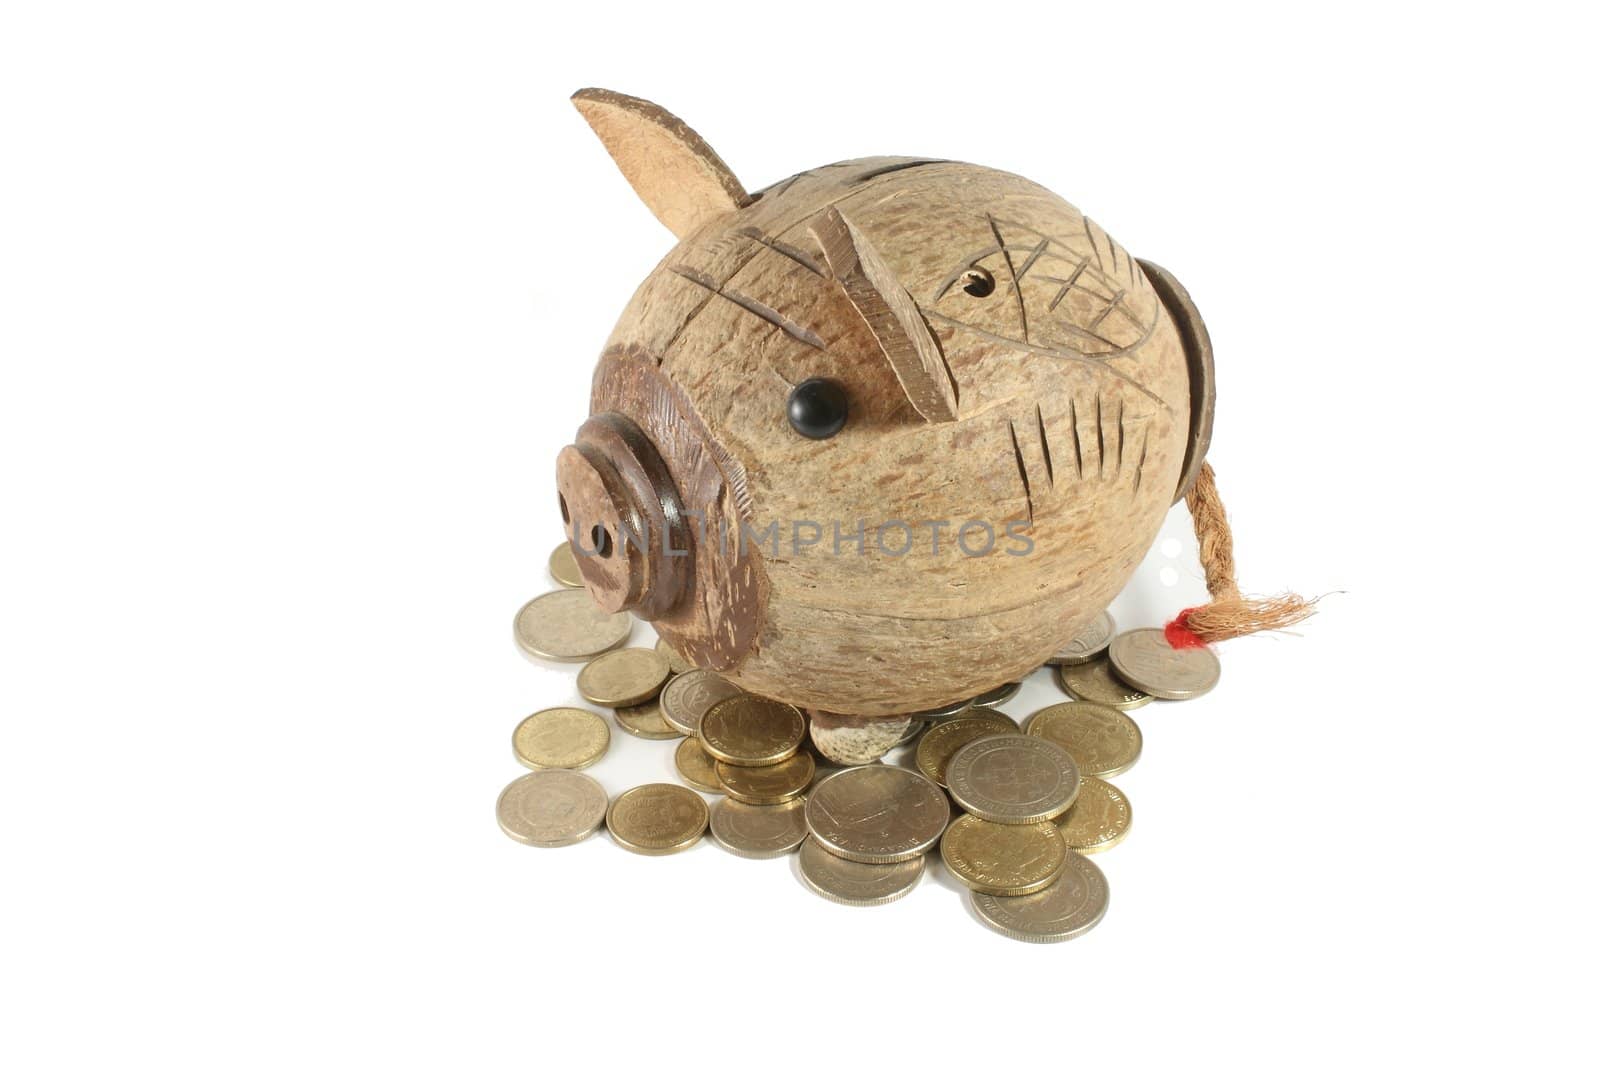 Pig money box and coins isolated on white background.